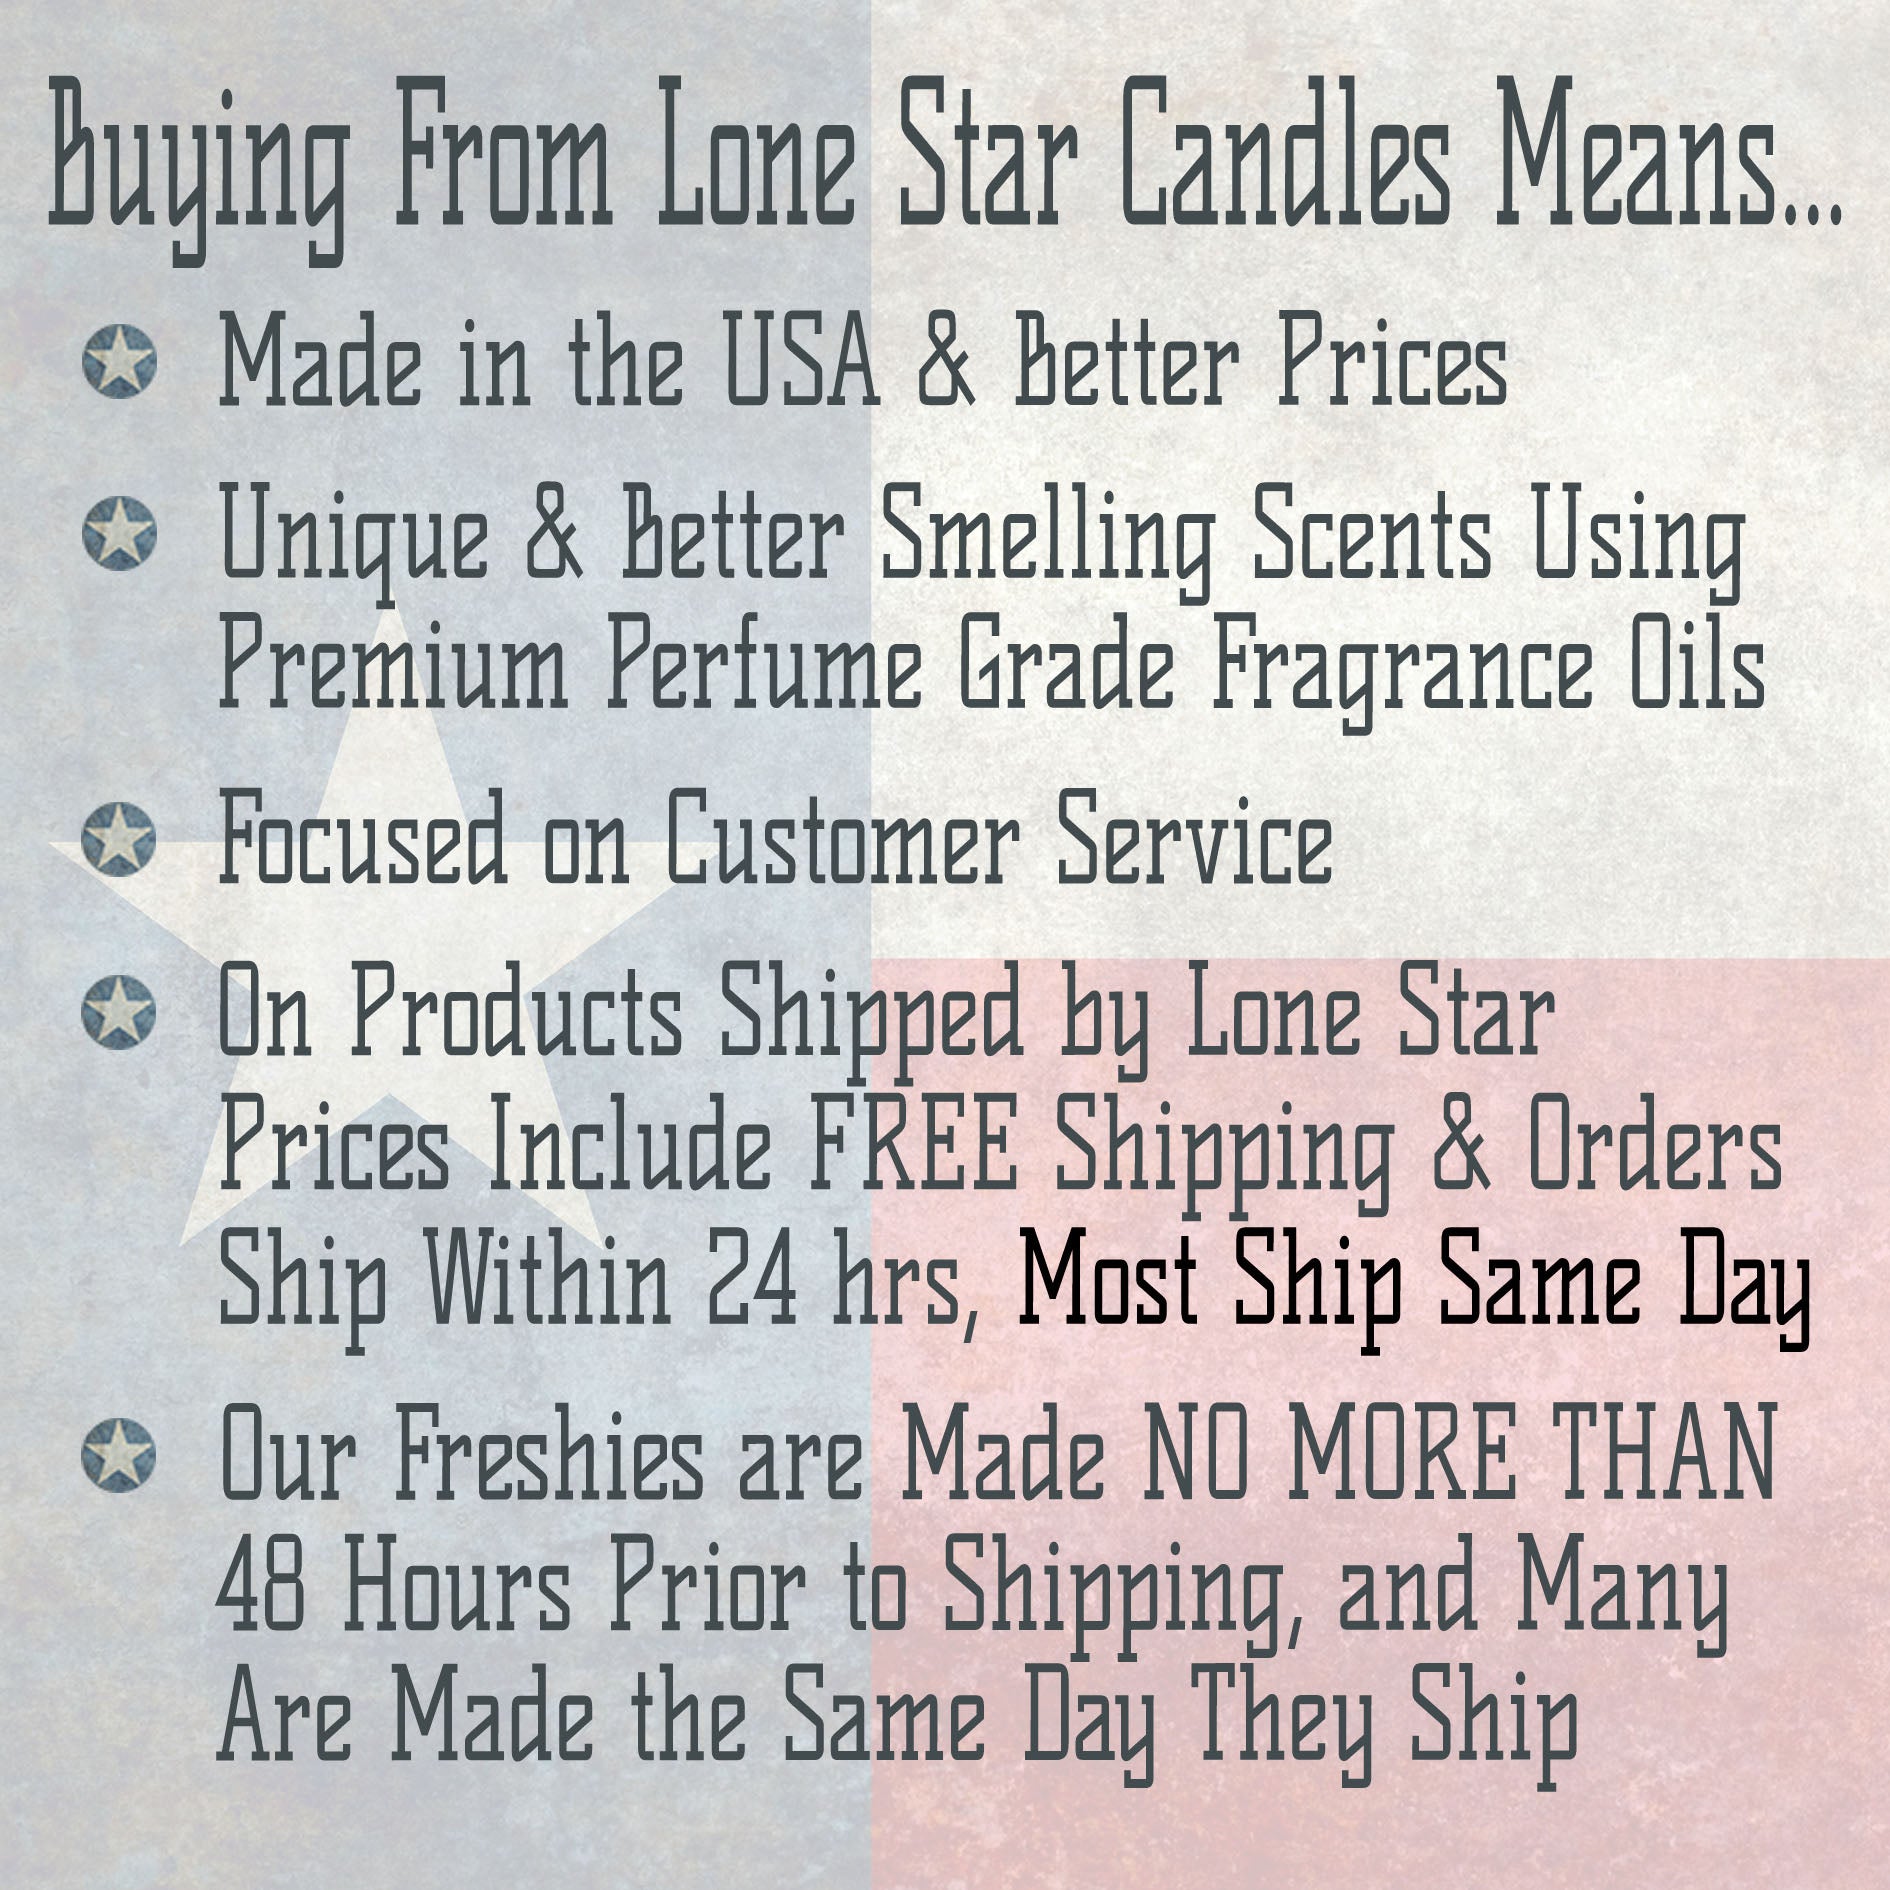 Red Hot Cinnamon, Lone Star Candles & More's Premium Strongly Scented Freshies, Red Hot Candy Like in the Theatre, Car & Air Freshener, USA Made in Texas, Truck & Christmas Tree 1-Pack